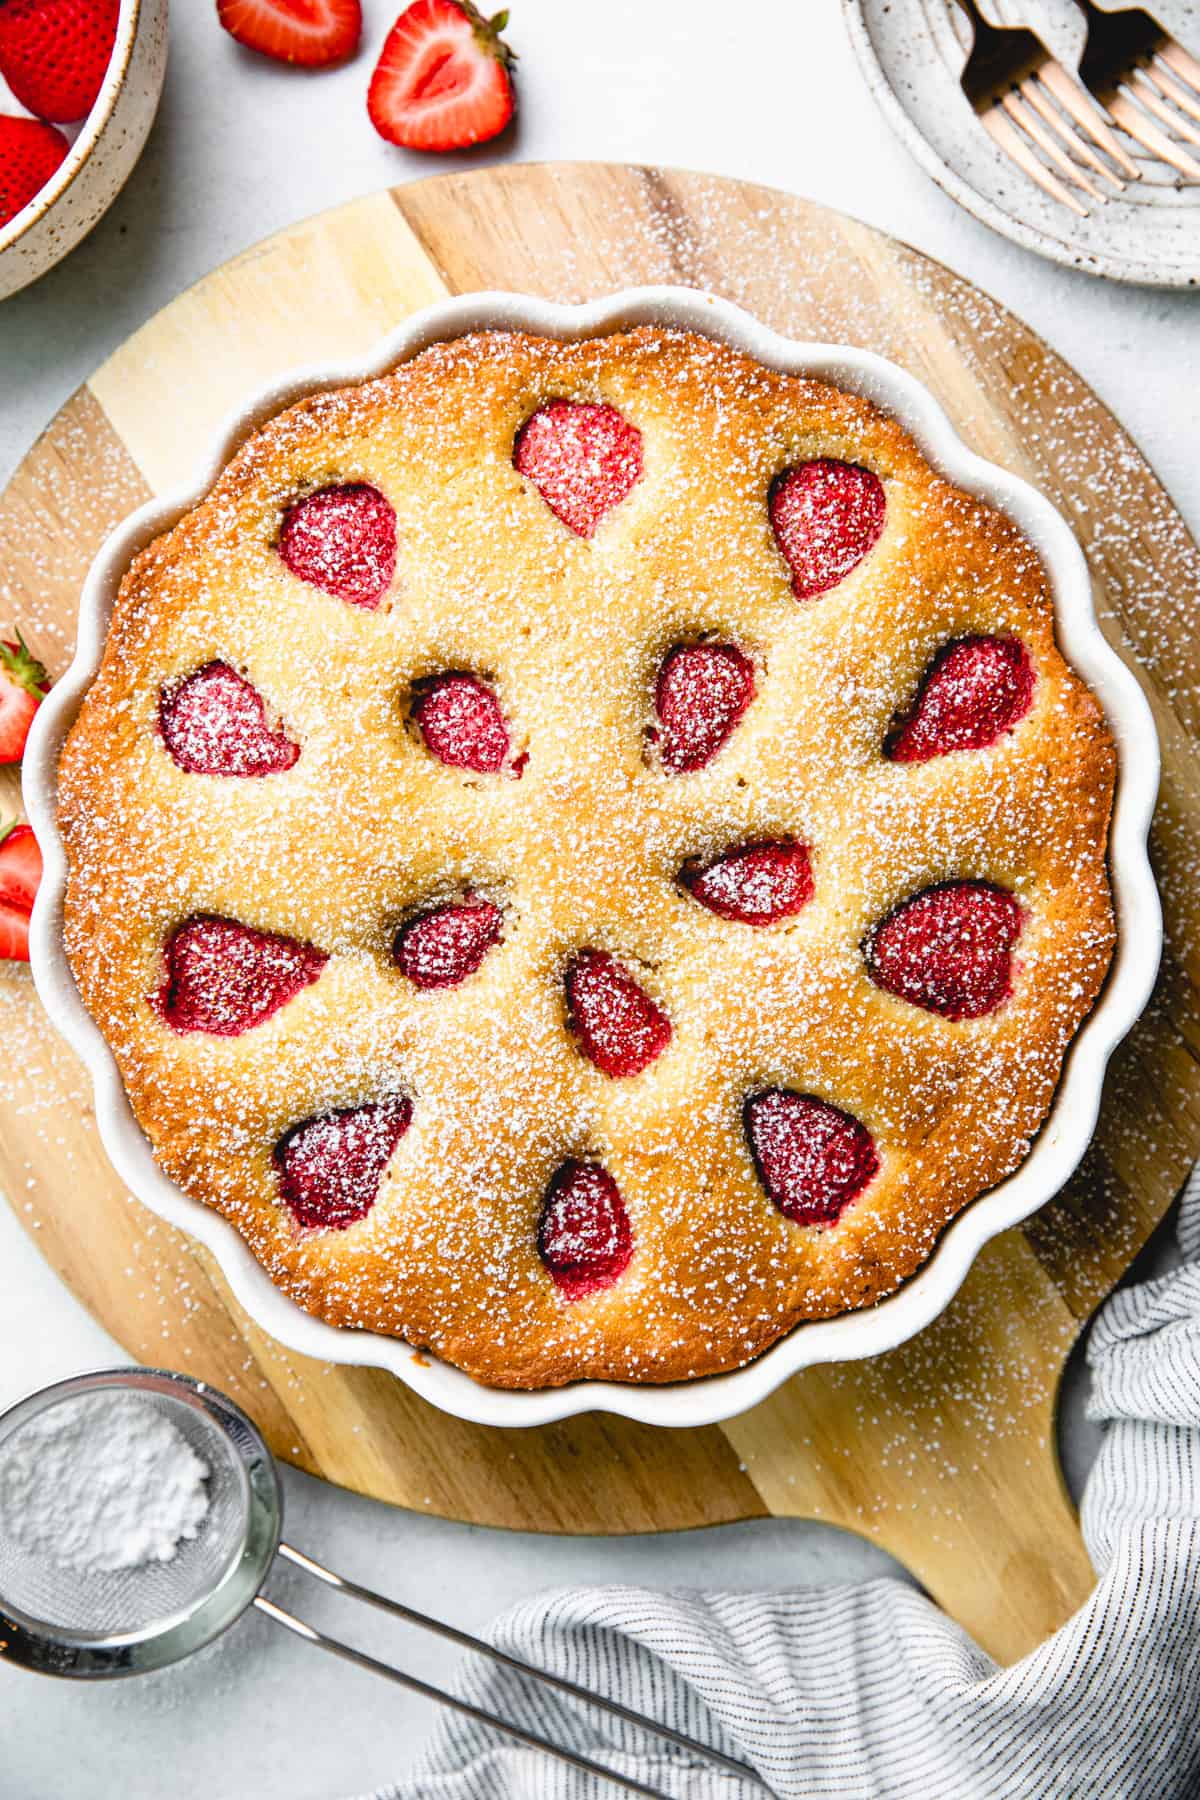 A vanilla coffee cake, topped with strawberries, in a white round baking pan on a wooden board.